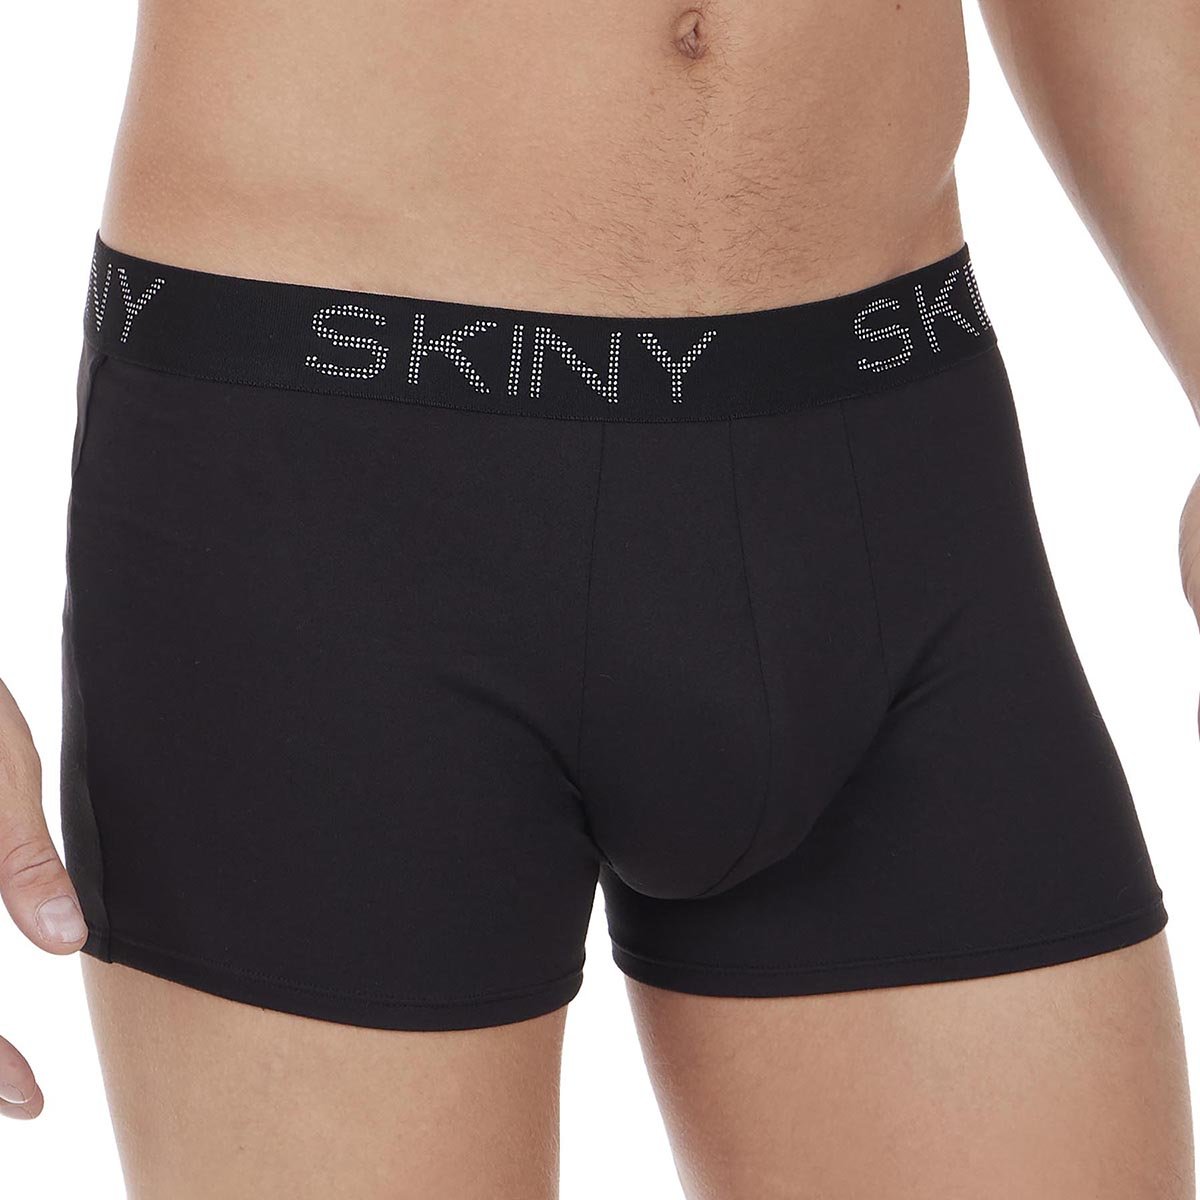 Bóxer Skiny 3 Pack Your Tradition para Hombre